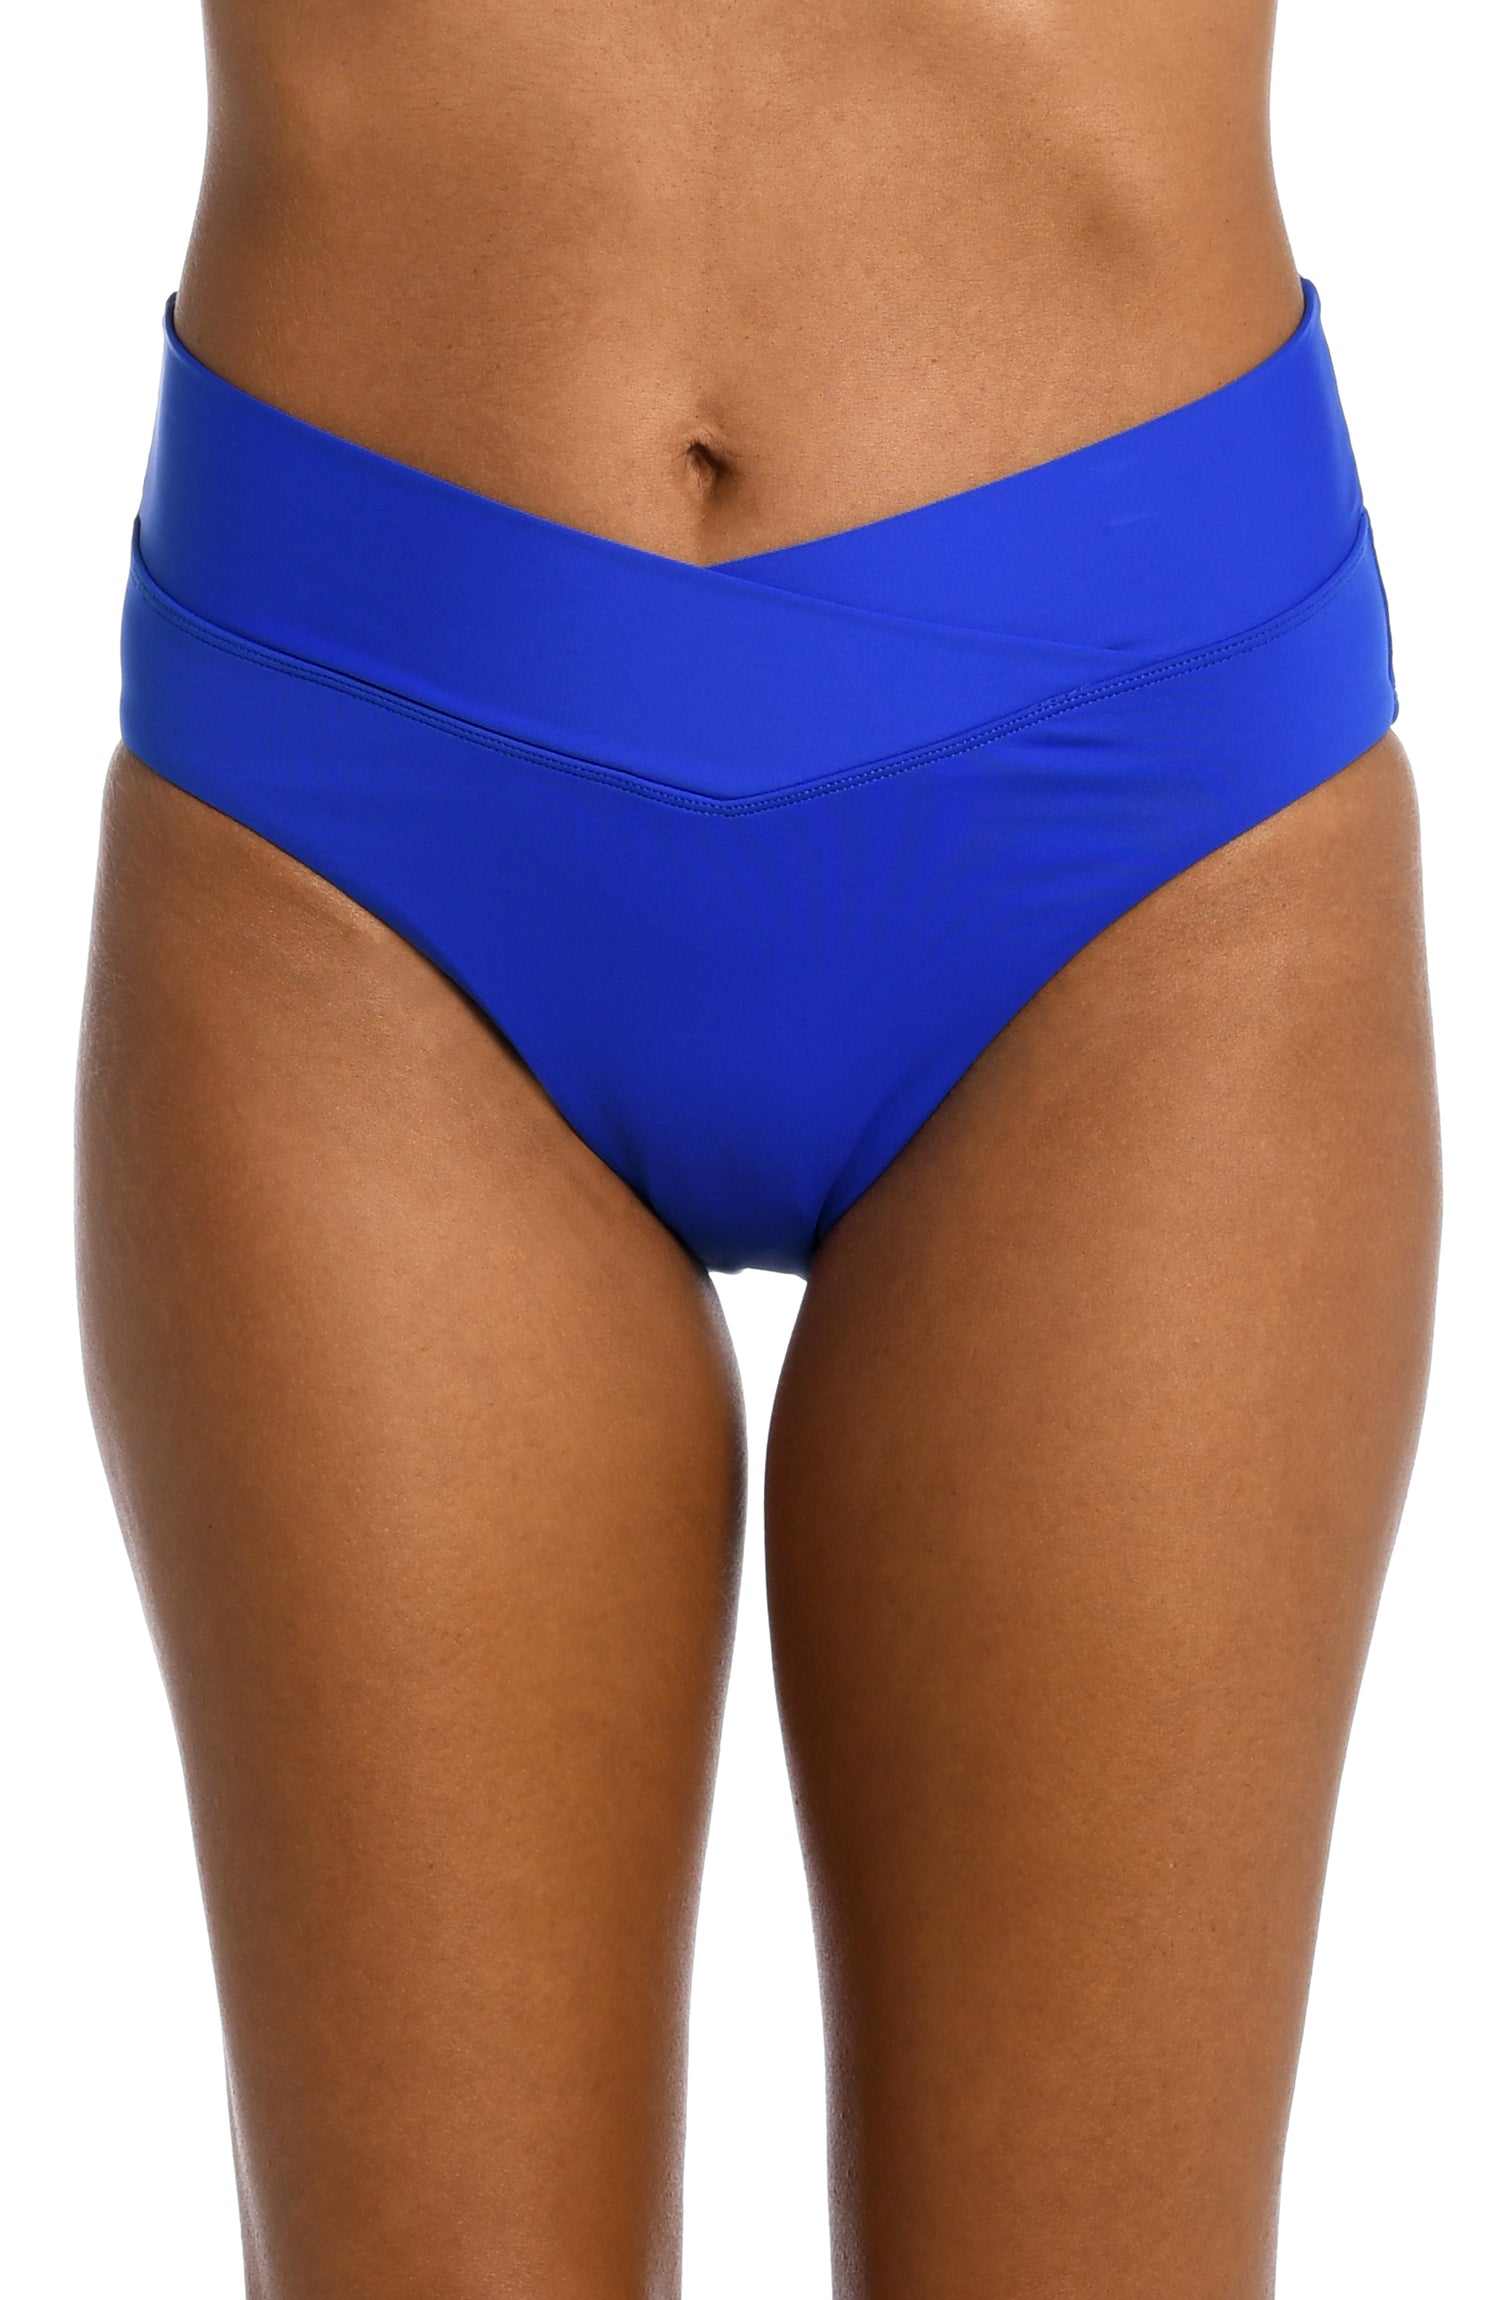 Model is wearing a sapphire colored high waist swimsuit bottom from our Best-Selling Island Goddess collection.